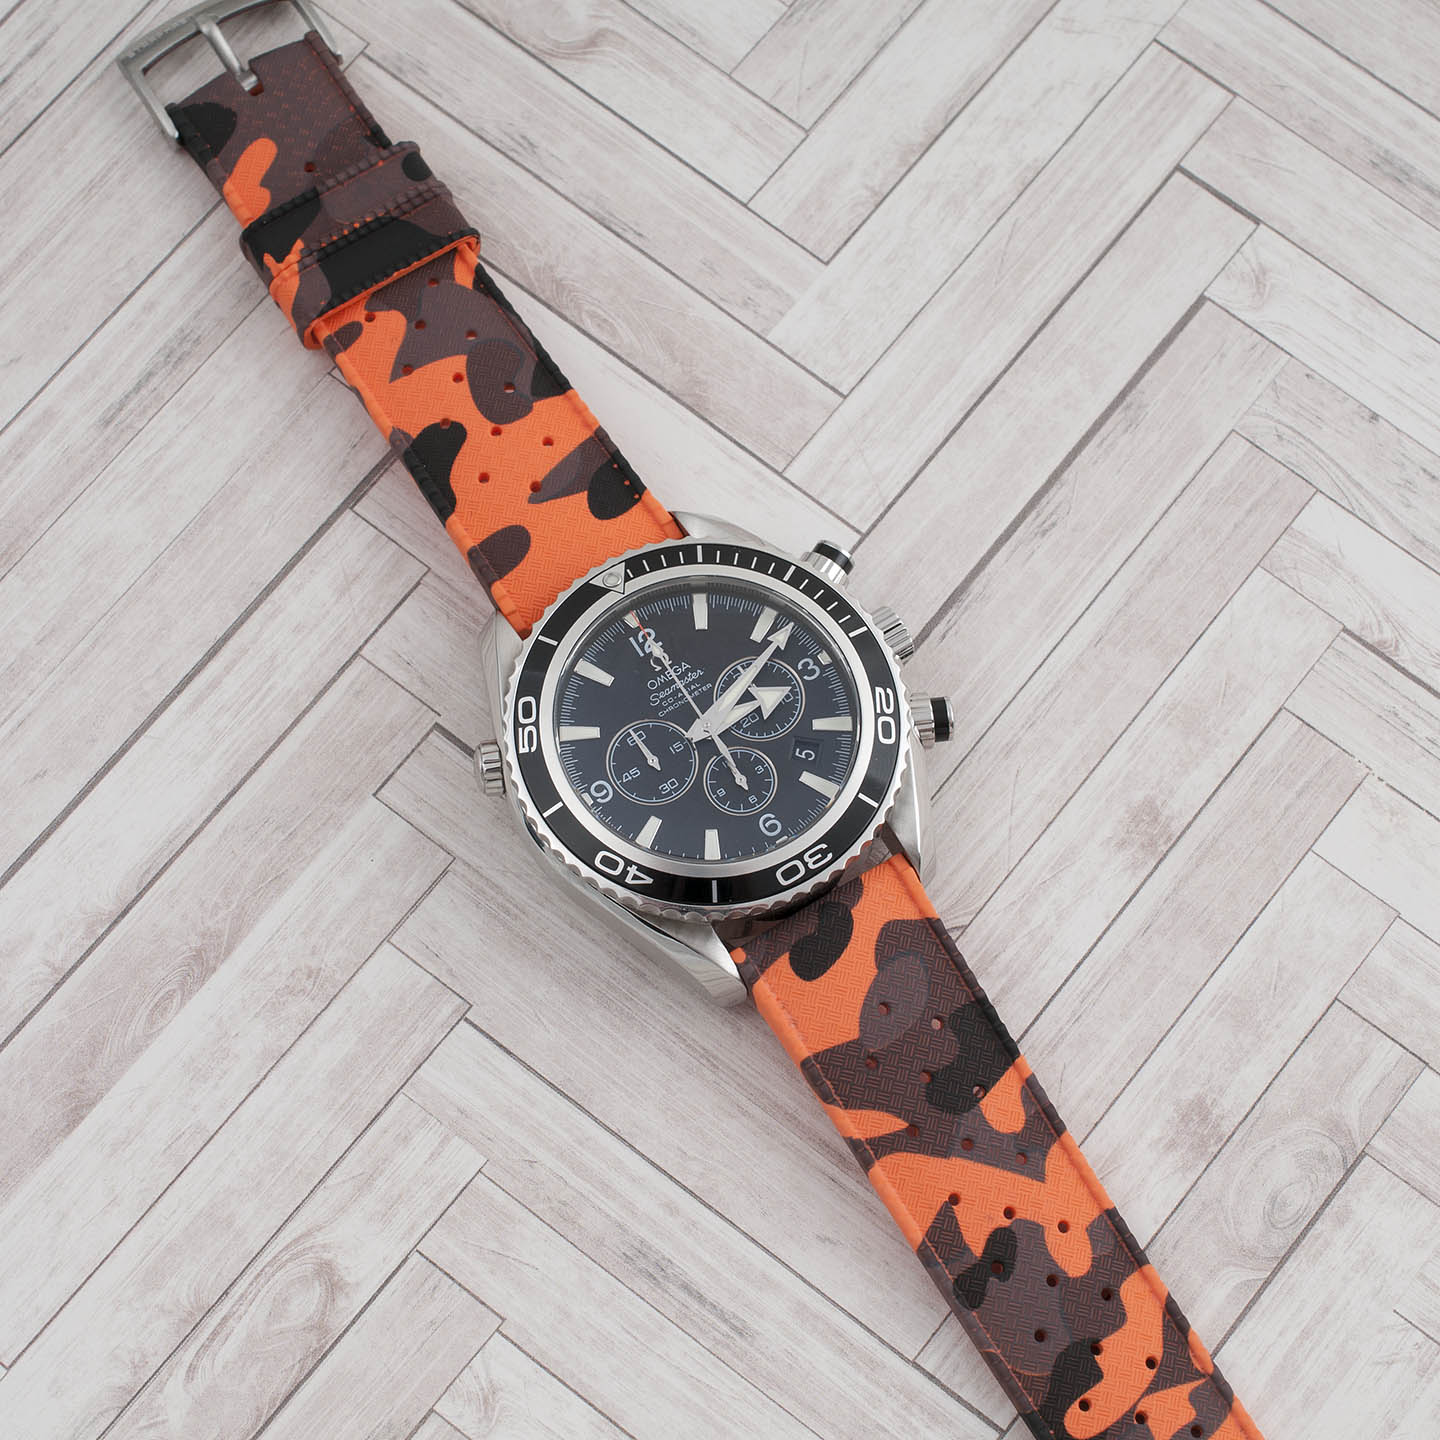 Tropical retro vintage replacement watch strap band FKM rubber tropic 19mm 20mm 21mm 22mm orange camo camouflage omega PO chrono